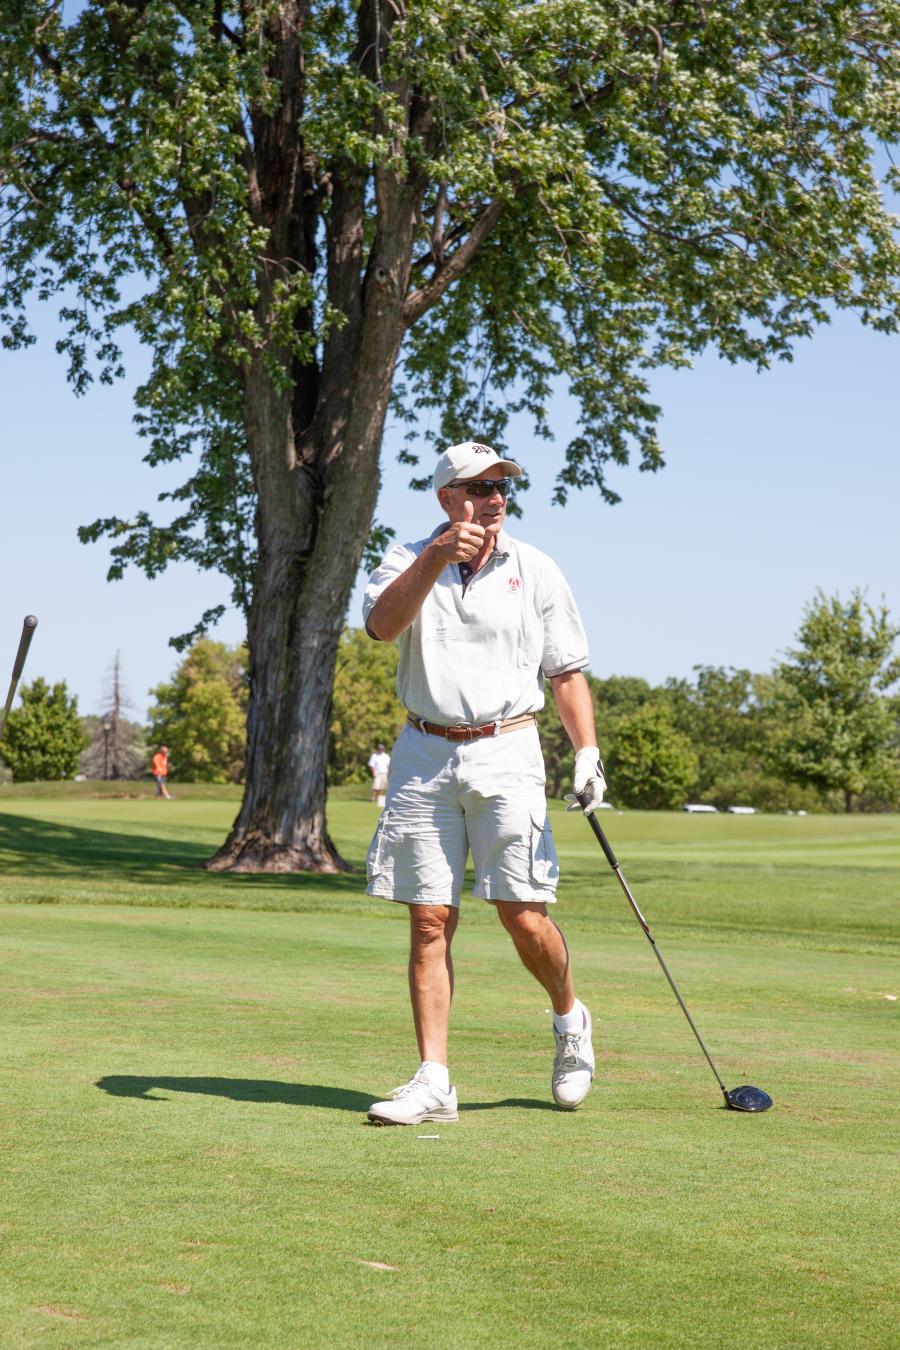 Scott Weicht of Adolfson & Peterson Construction reacts after a great shot on Hole 10.
(AGC of Minnesota photo)